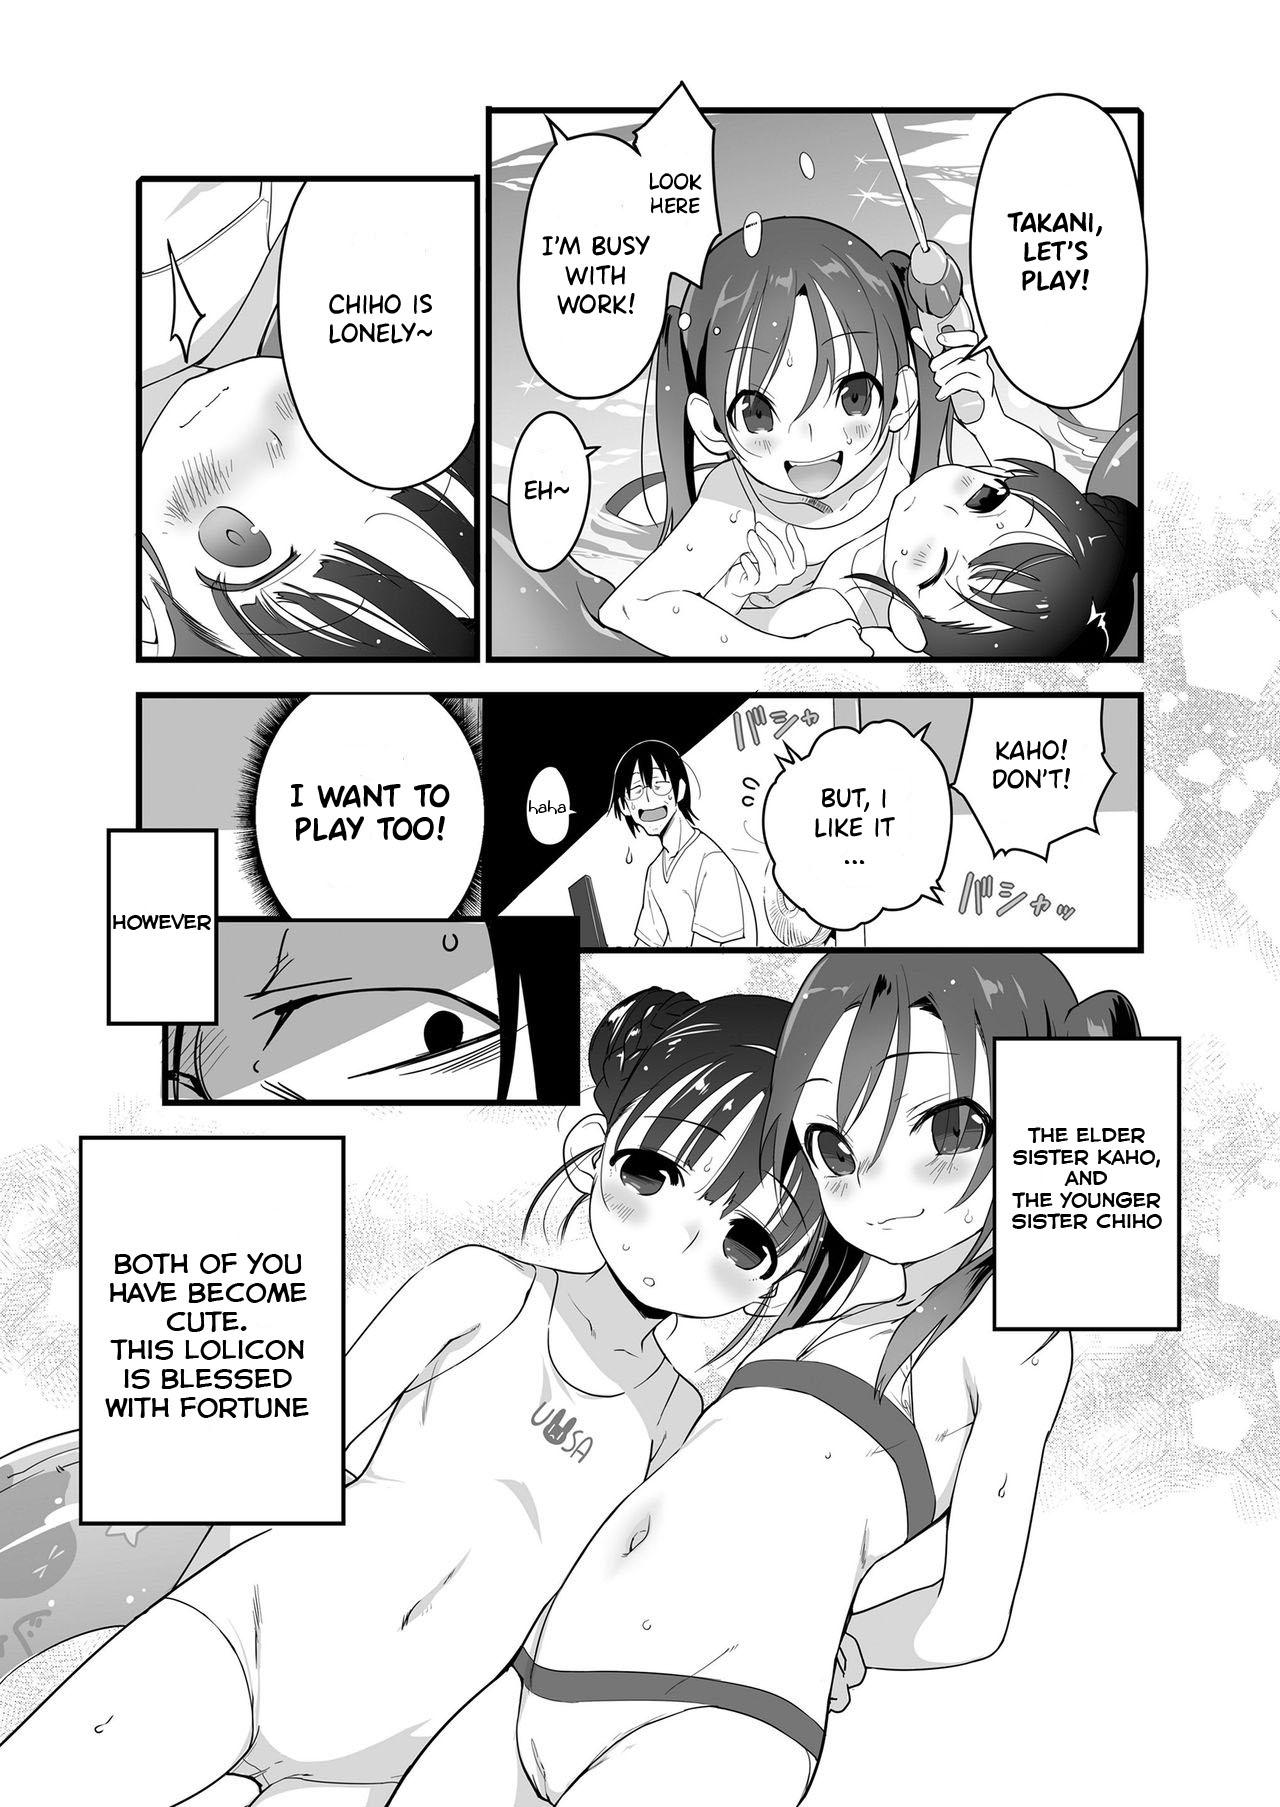 Pussylick Uchiage Hanabi, Ane to Miruka? Imouto to Miruka? | Fireworks, Should we see it with the elder sister or the younger sister? Squirting - Page 3